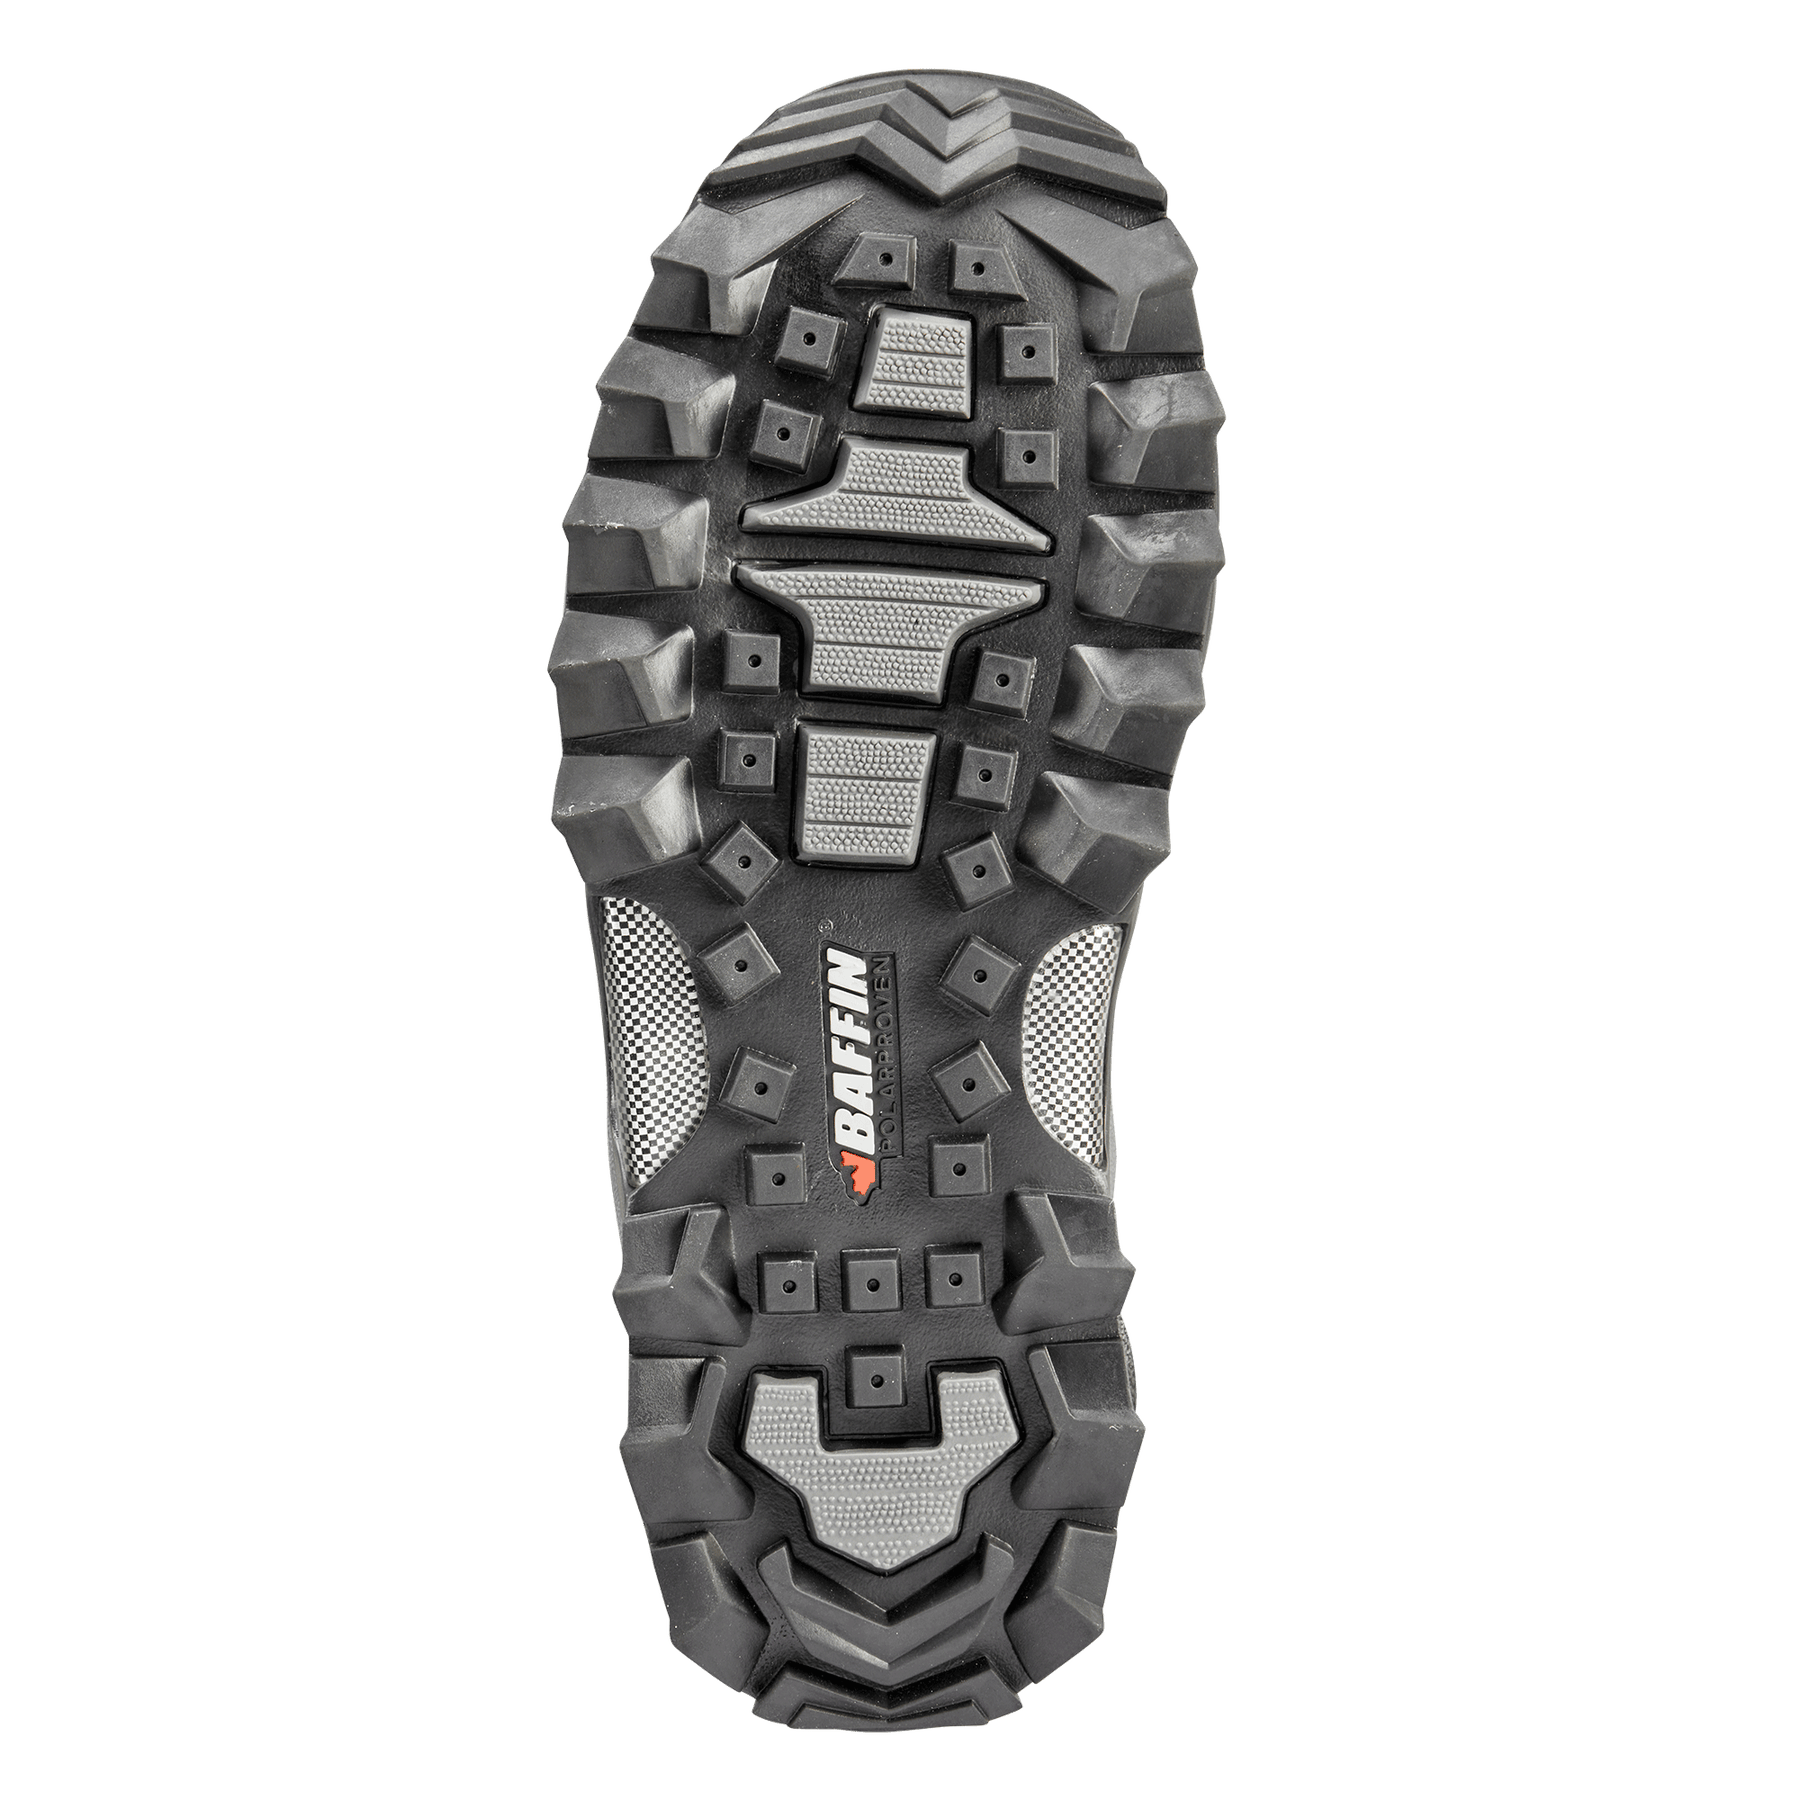 SNOW MONSTER | Men's Boot – Baffin - Born in the North '79